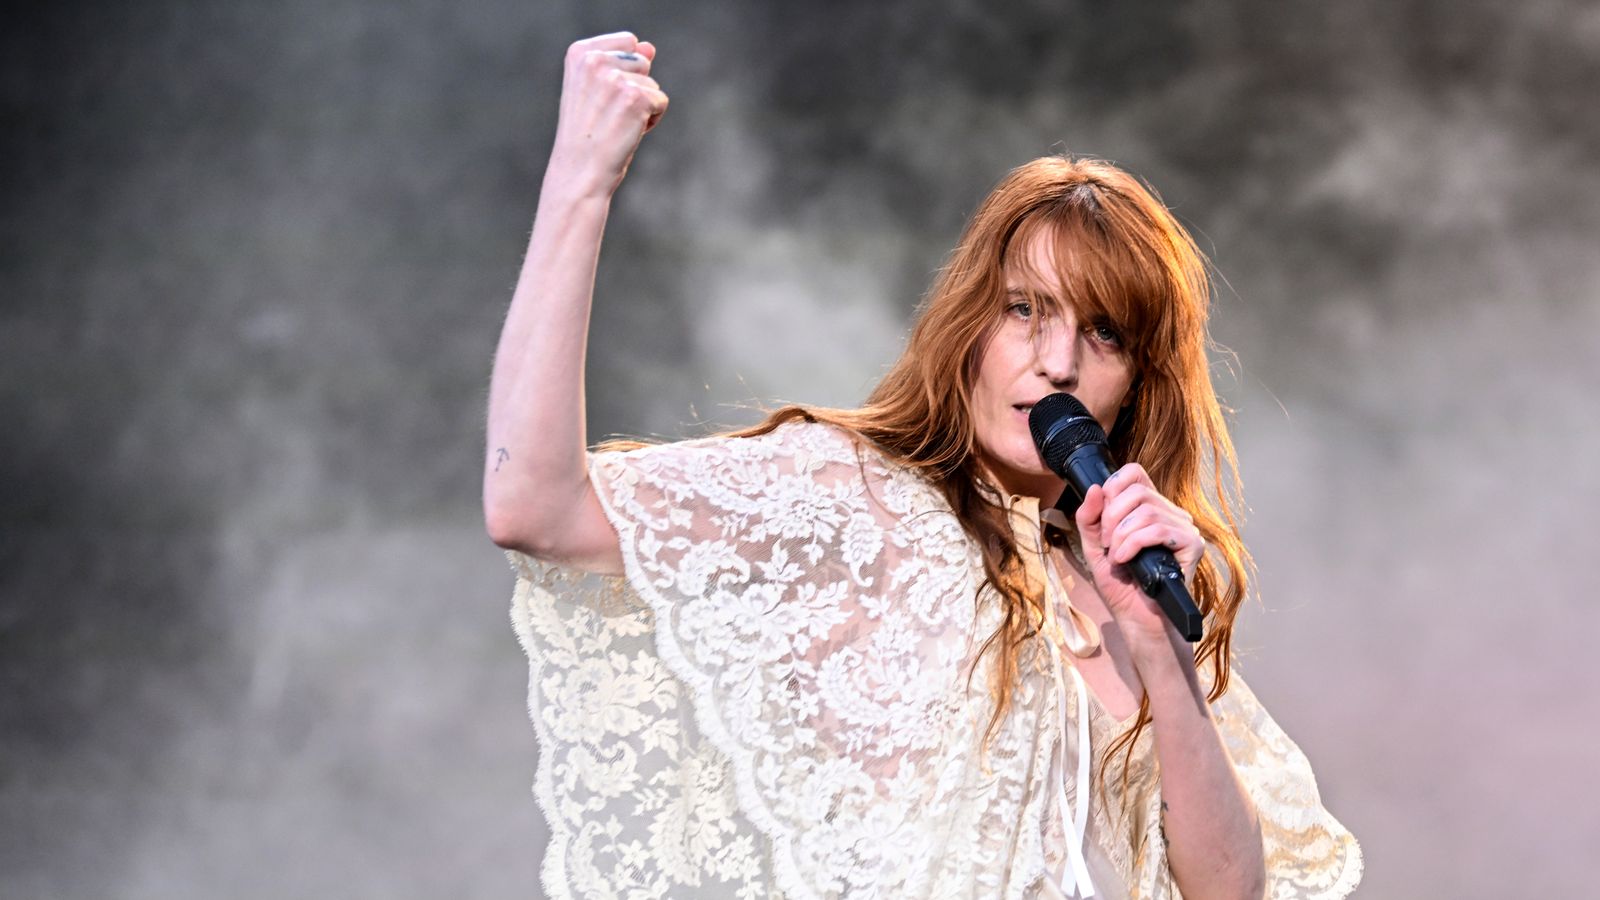 Florence And The Machine singer has 'life saving' surgery after cancelling gigs